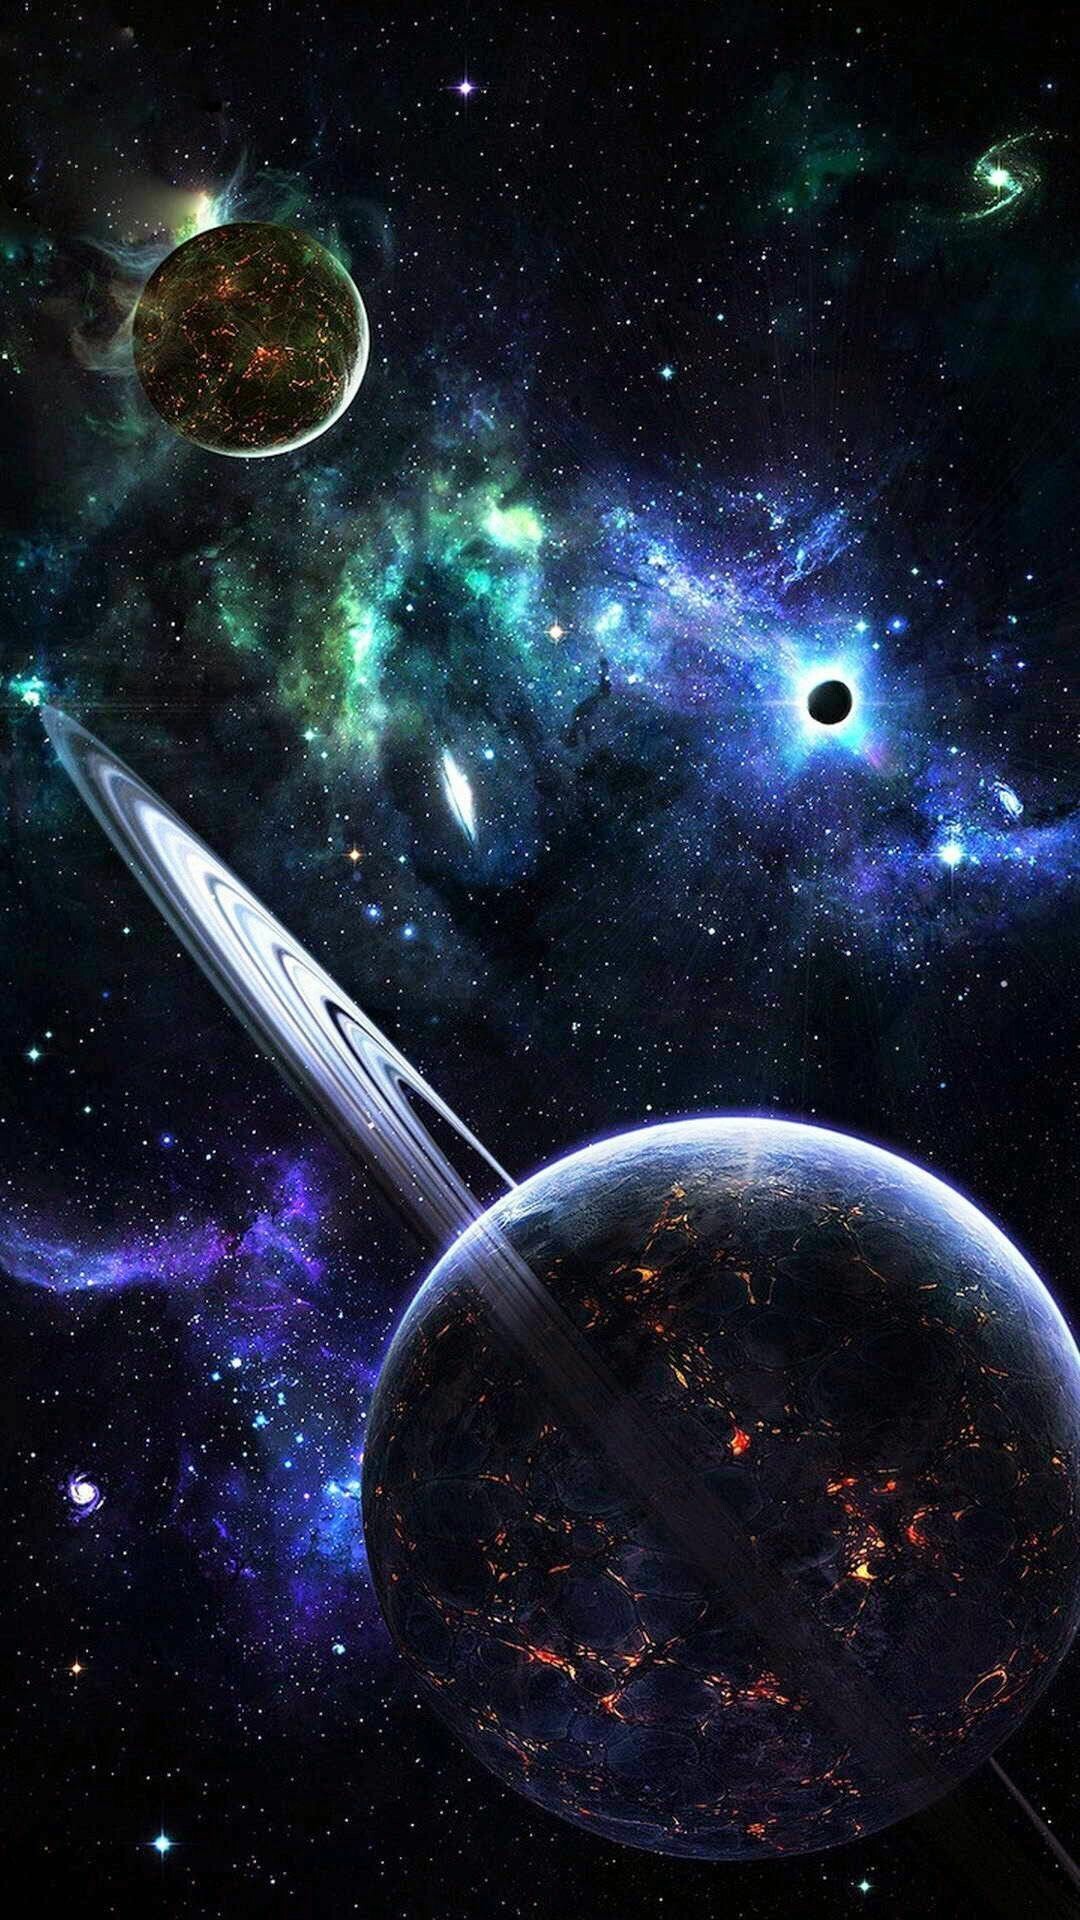 Outer Space: Celestial spheres, Interplanetary or interstellar expanse. 1080x1920 Full HD Background.